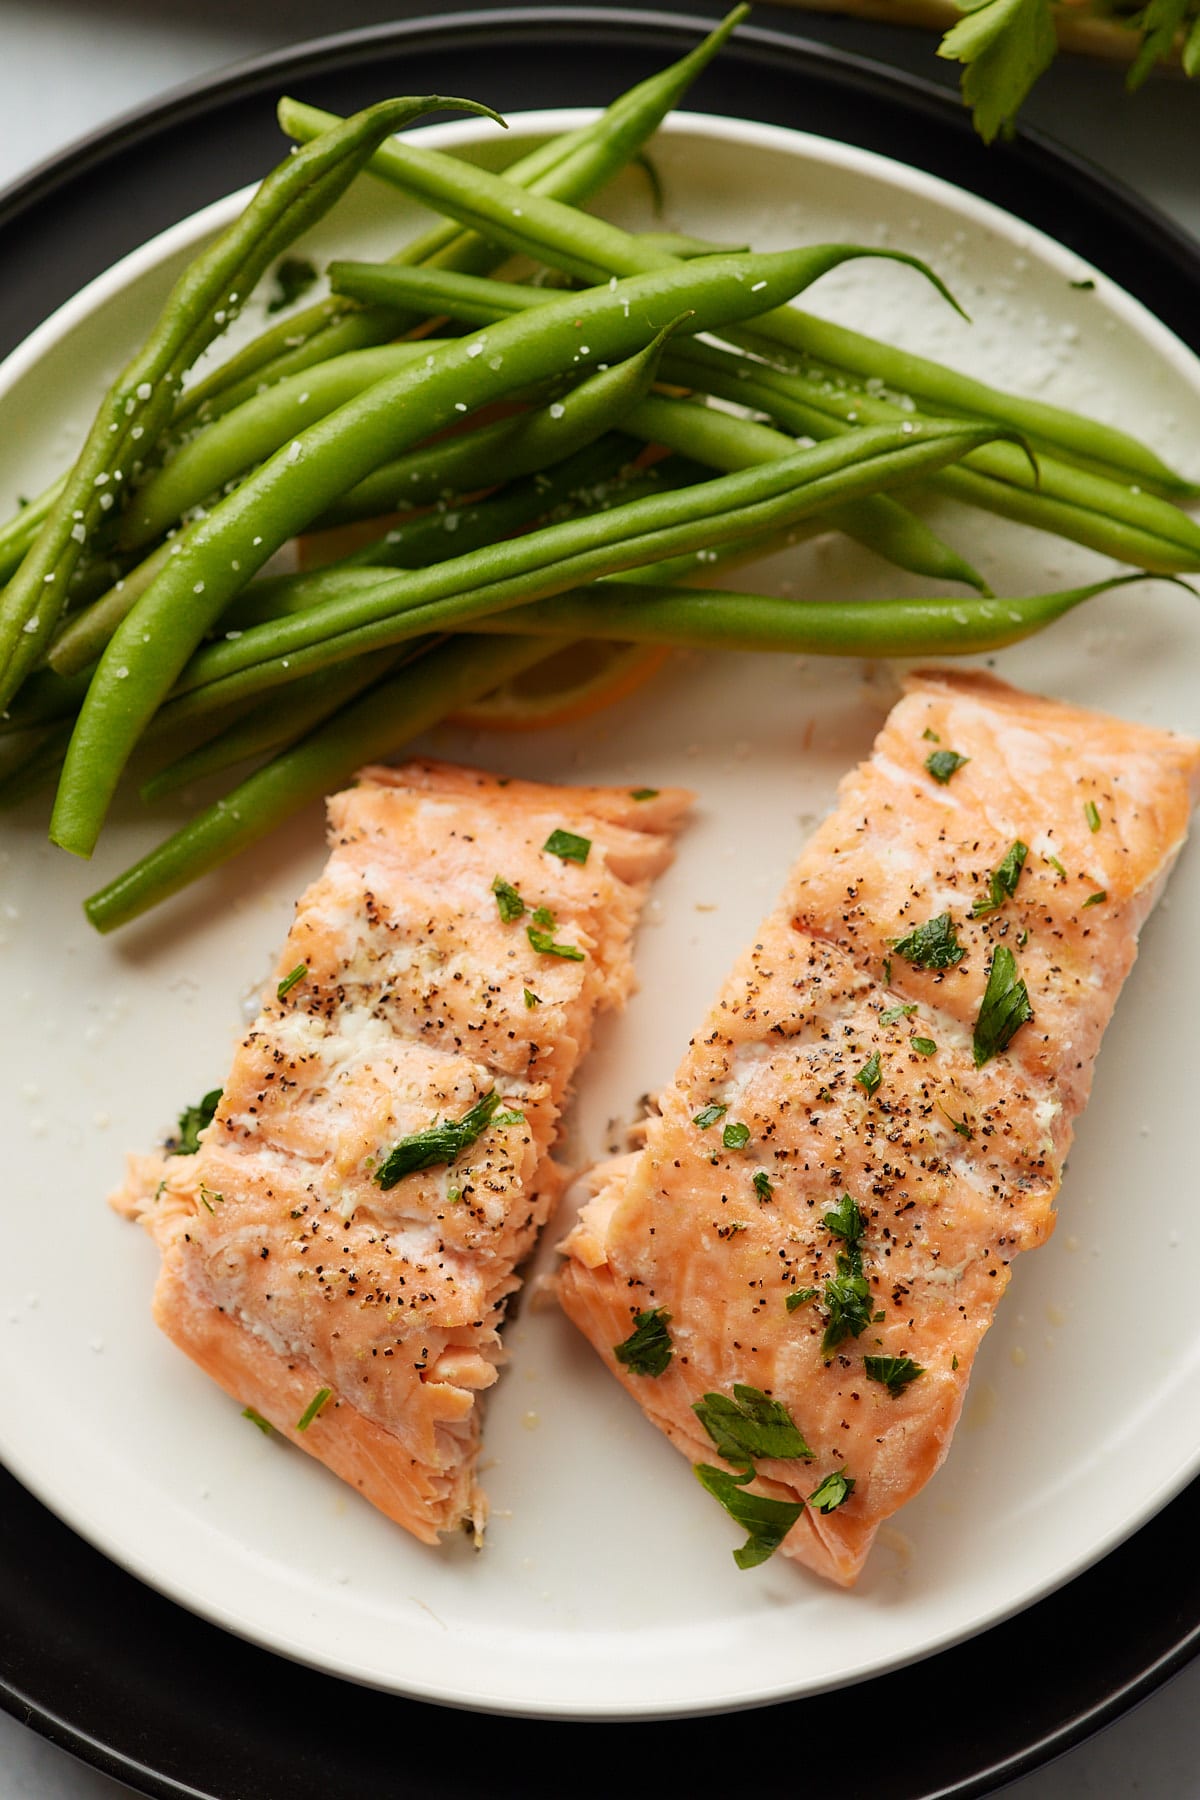 Overhead shot of salmon fillets served on a white plate with green beans.